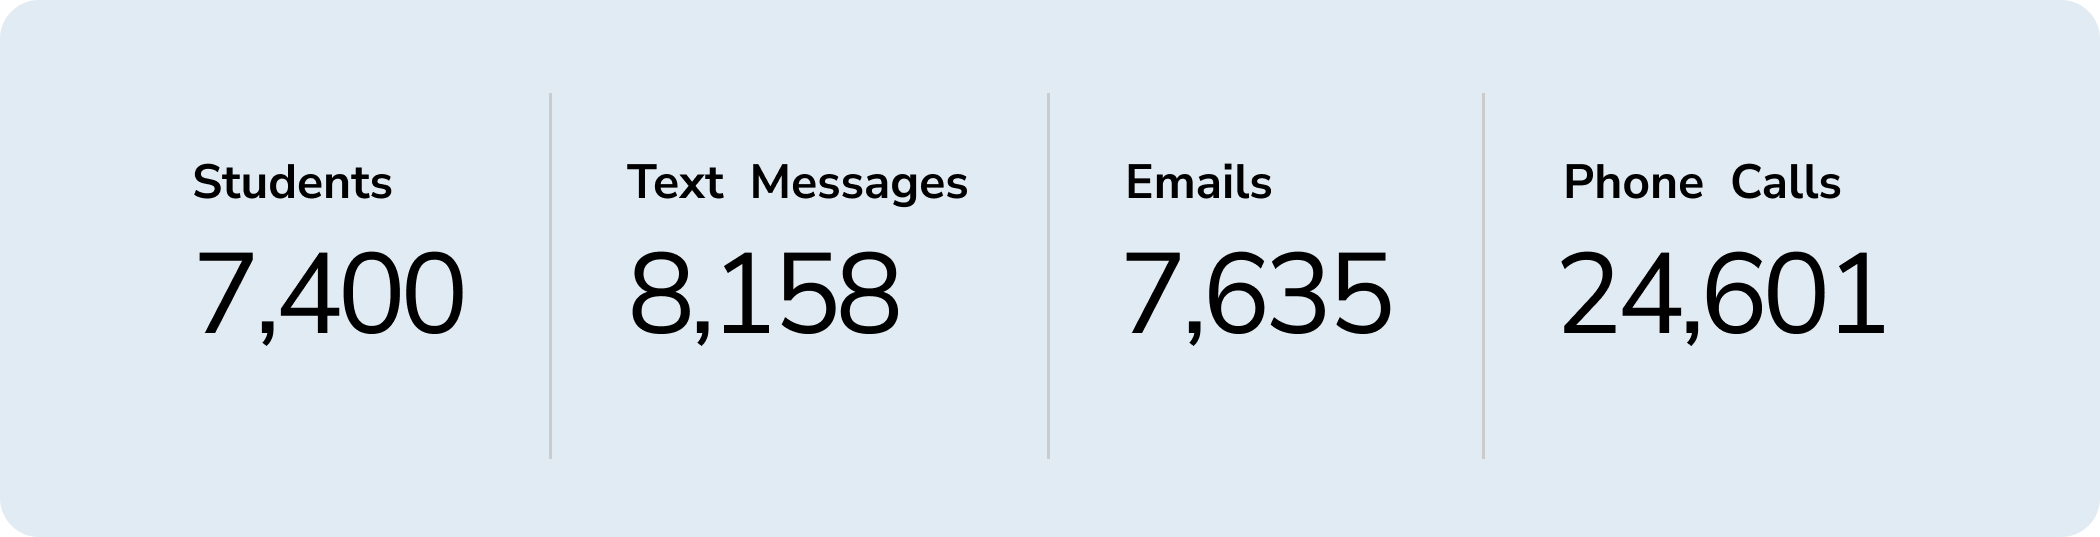 Stats - 7400 Students, 7158 Text Messages, 7635 Emails, 24601 Phone Calls